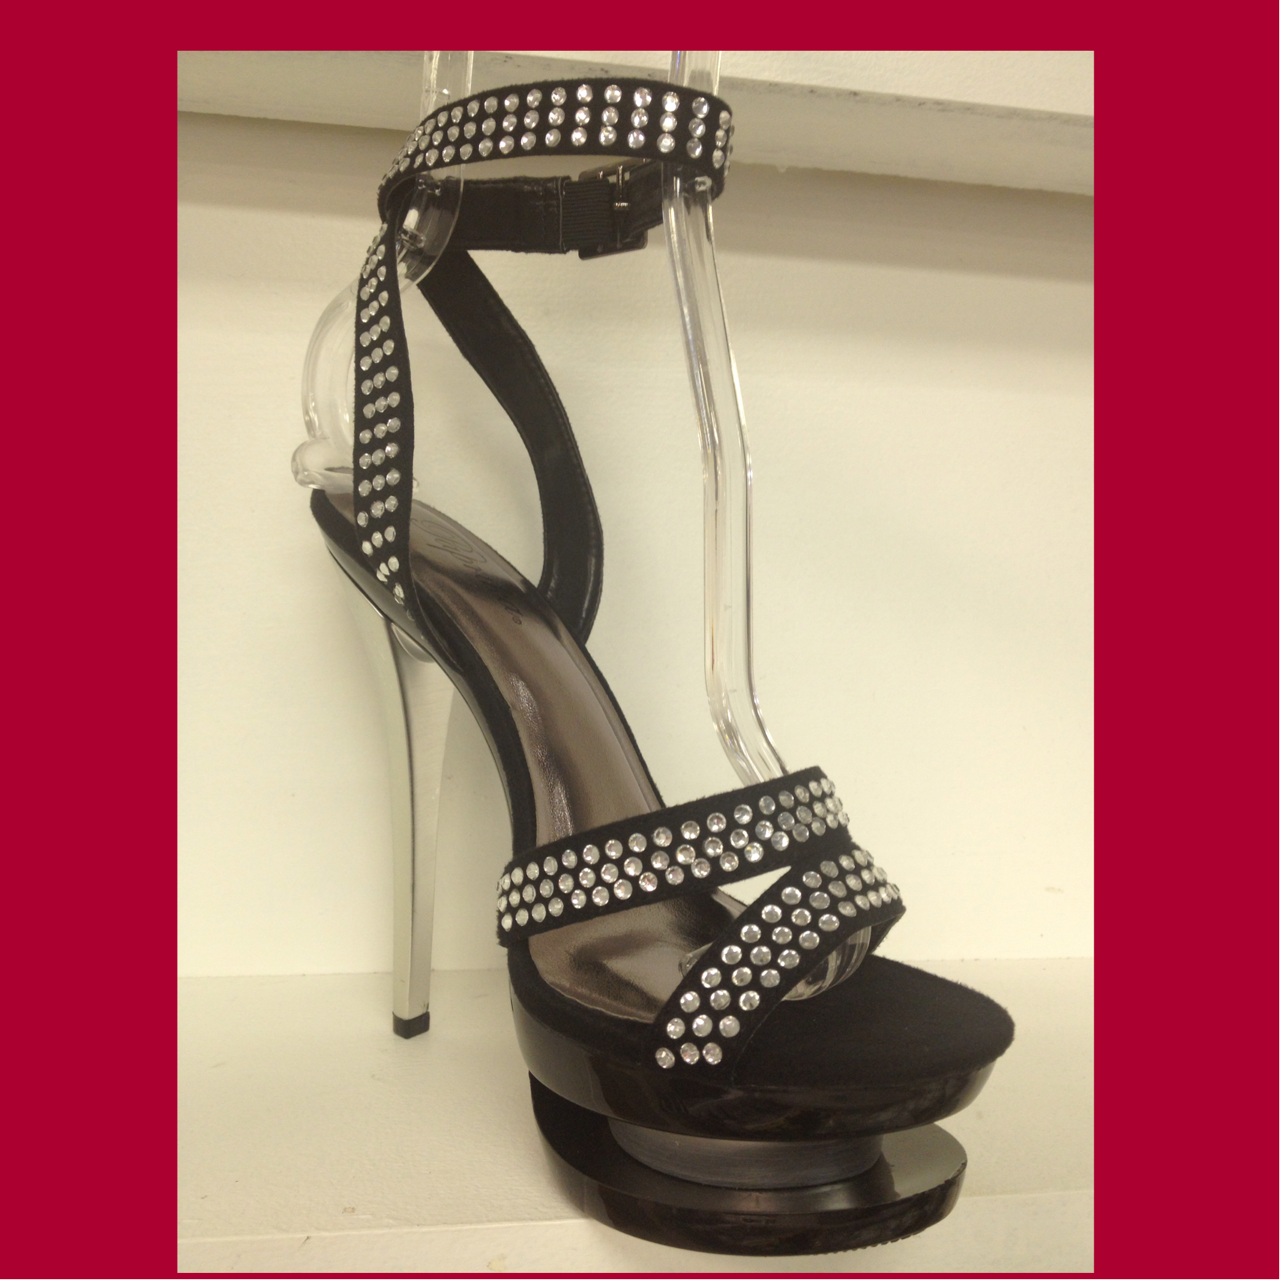 Black and Silver Platform Sandals with Clear Rhinestones $65